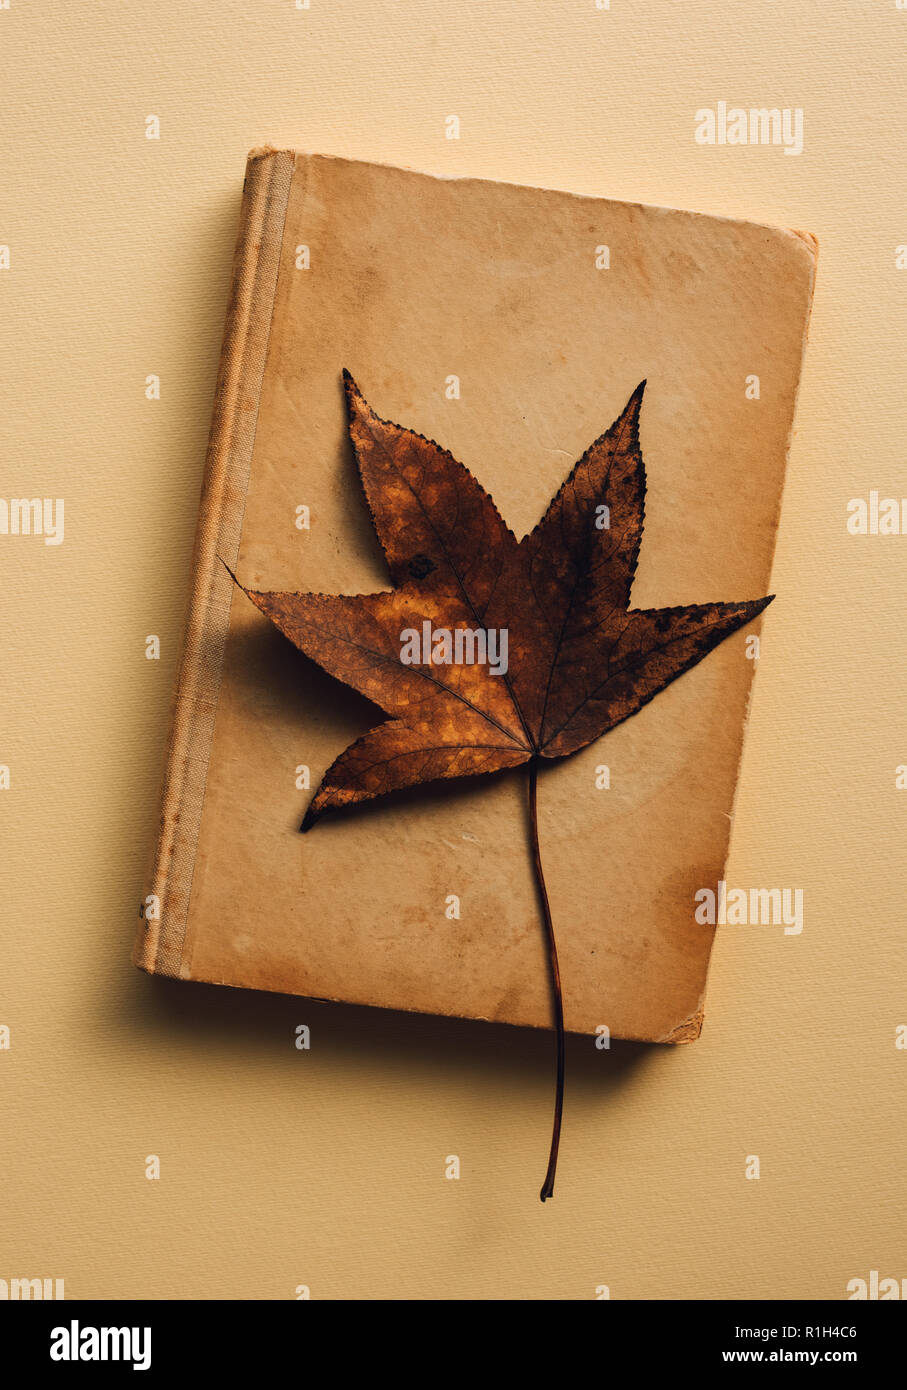 Old book and autumn leaves, fall season concept Stock Photo